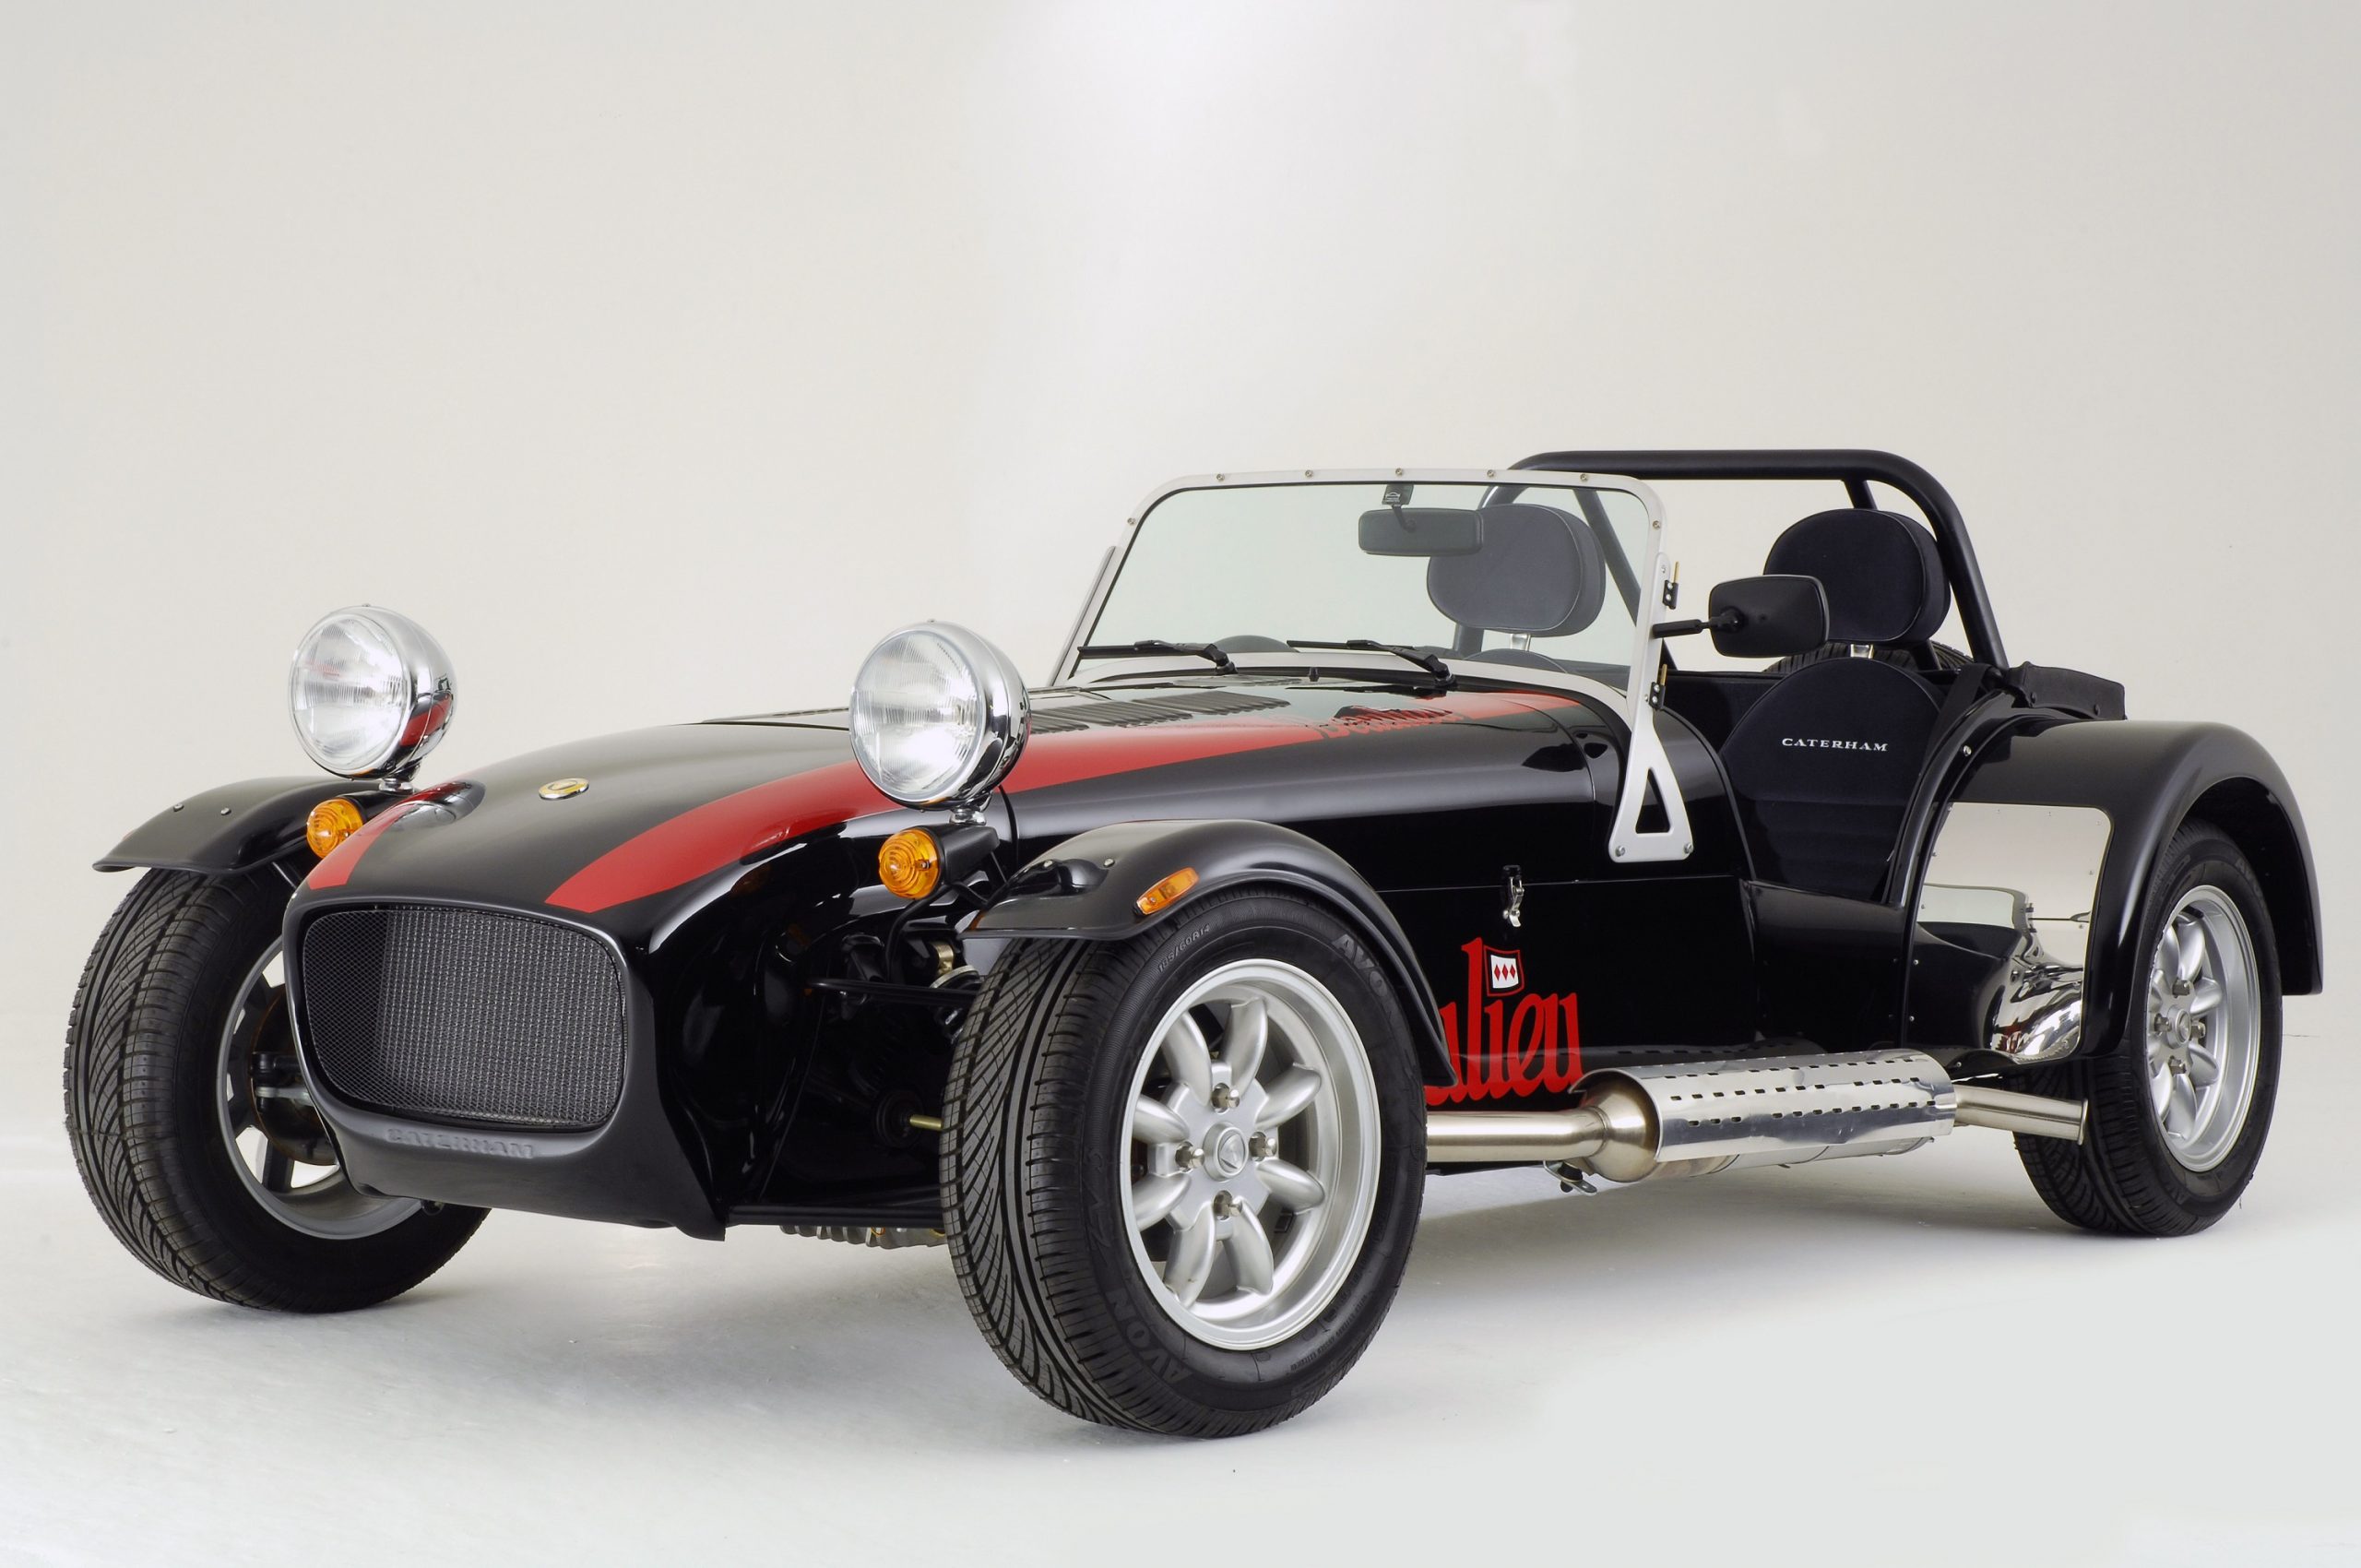 The Caterham Super Seven, based on the Lotus 7 sports car, in black